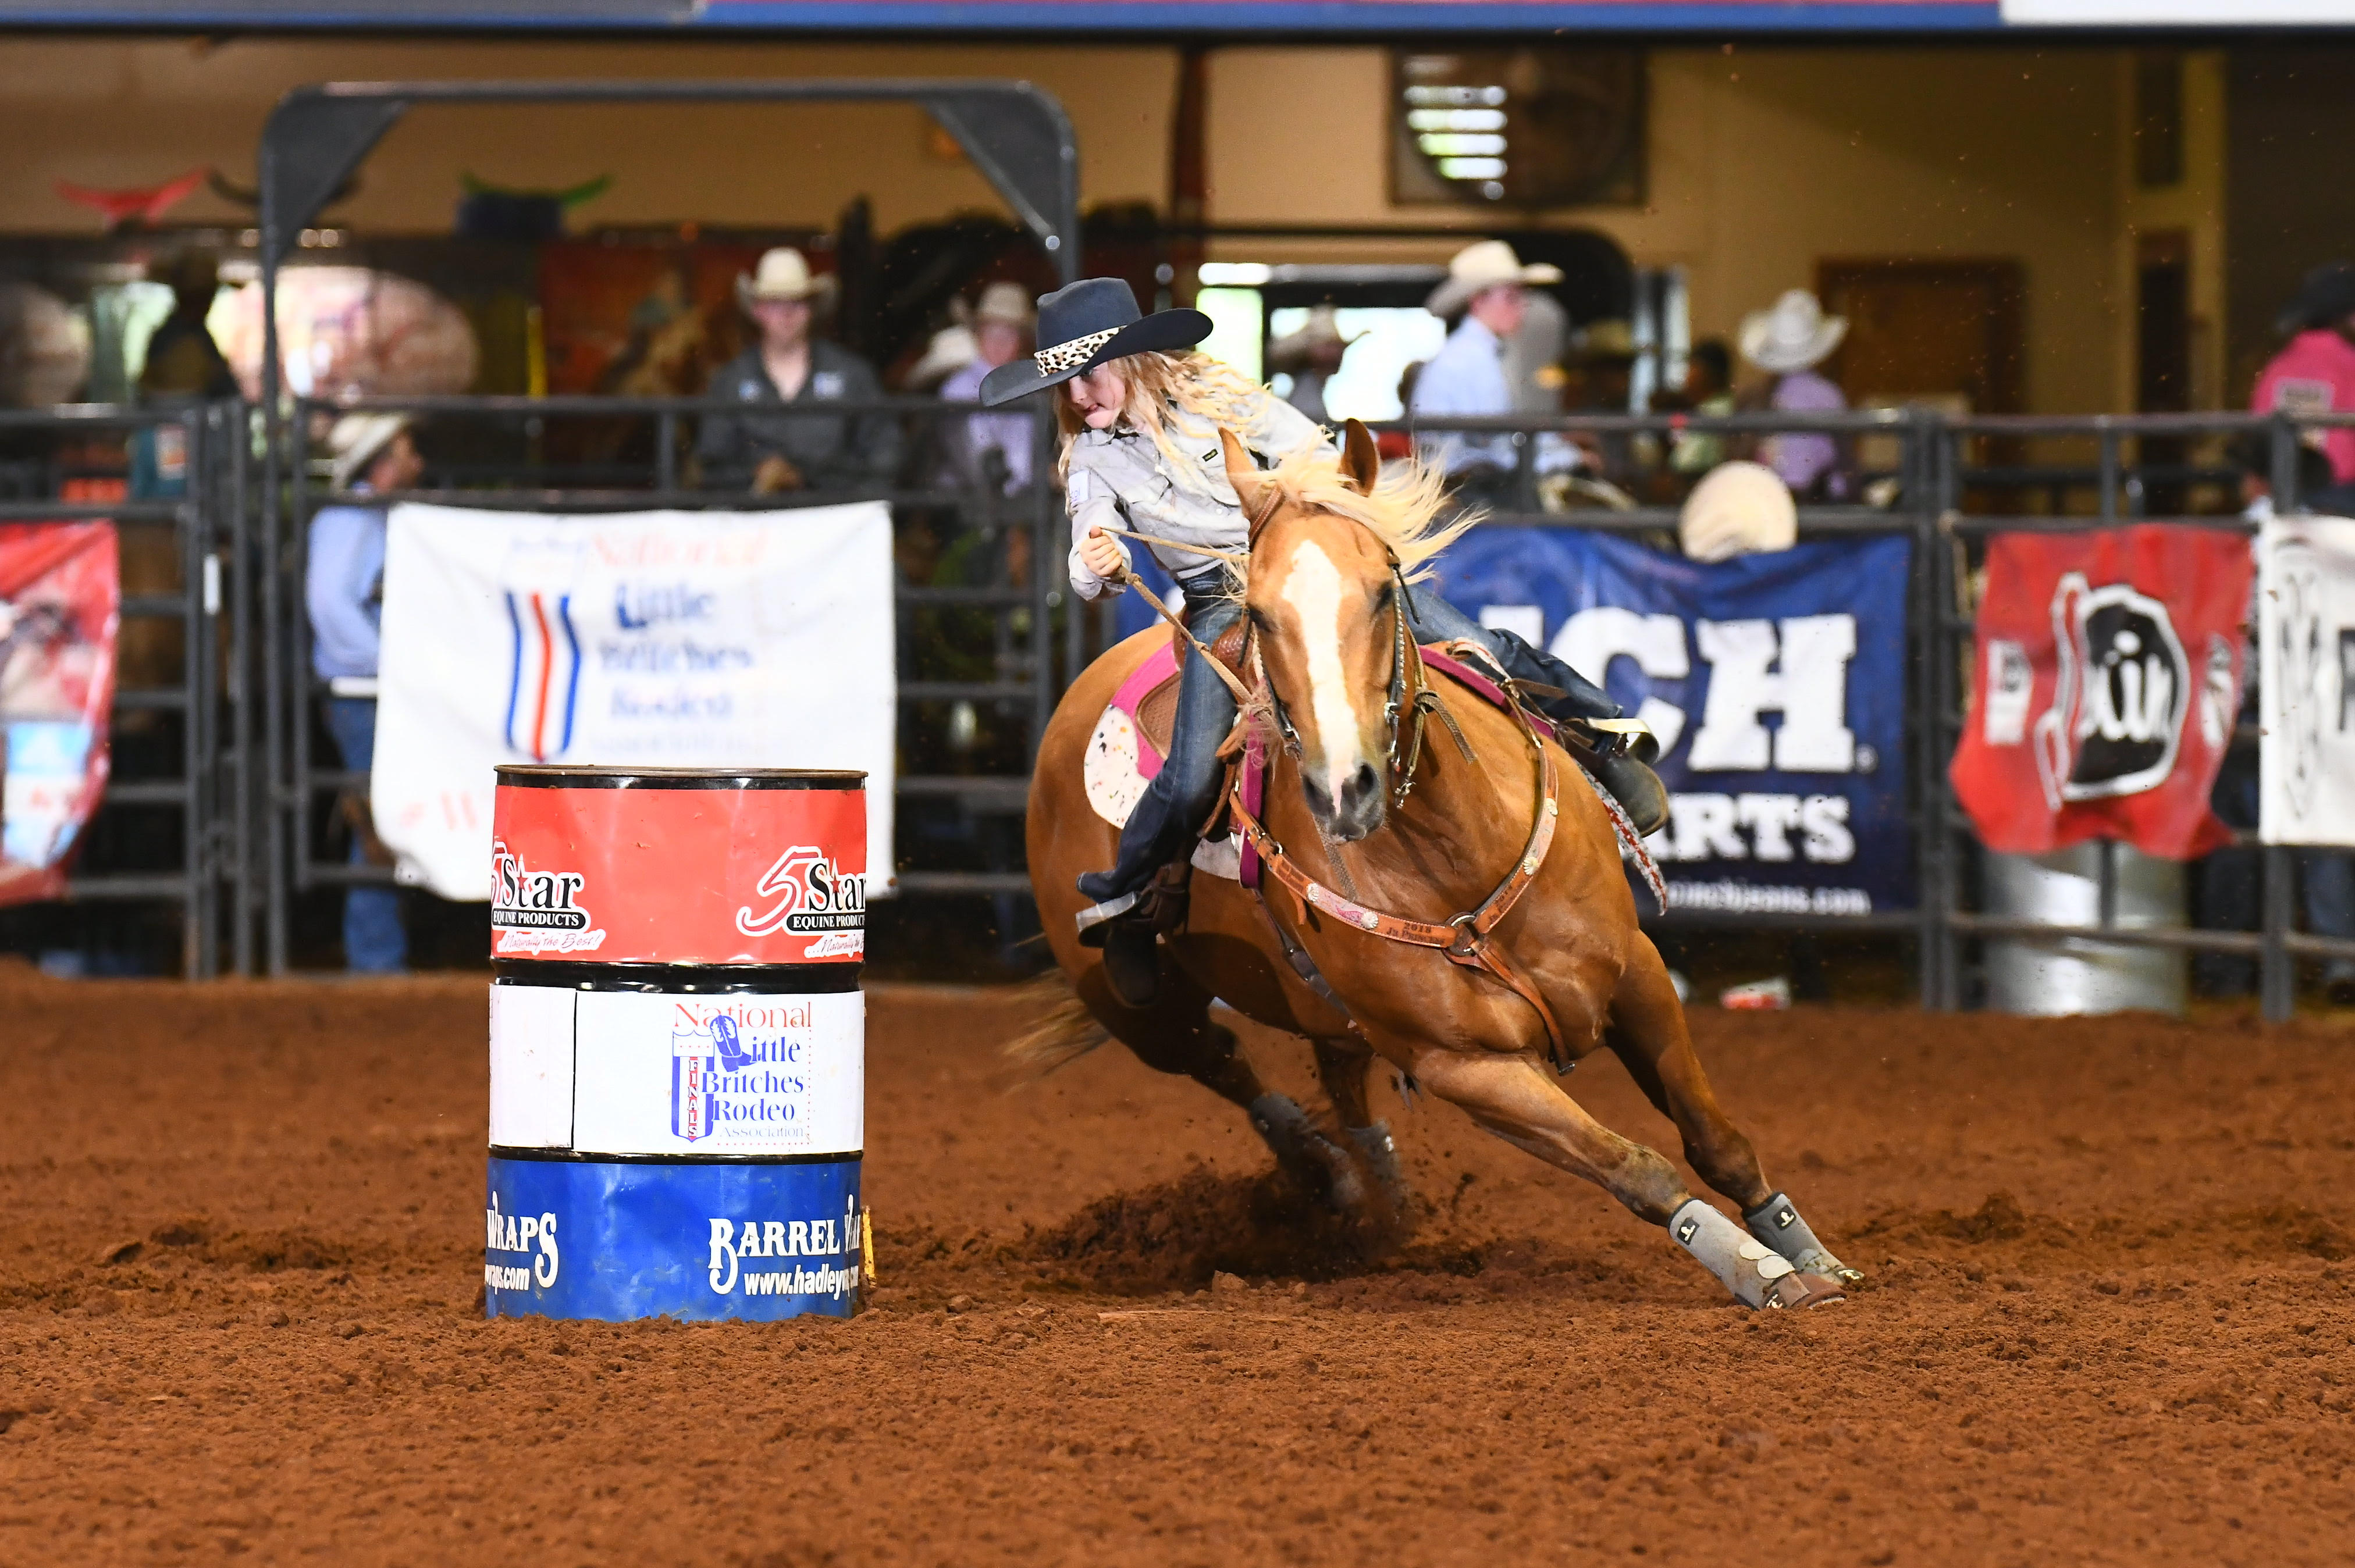 8 Year Old Barrel Racer From St George Qualifies For National Rodeo Events ...